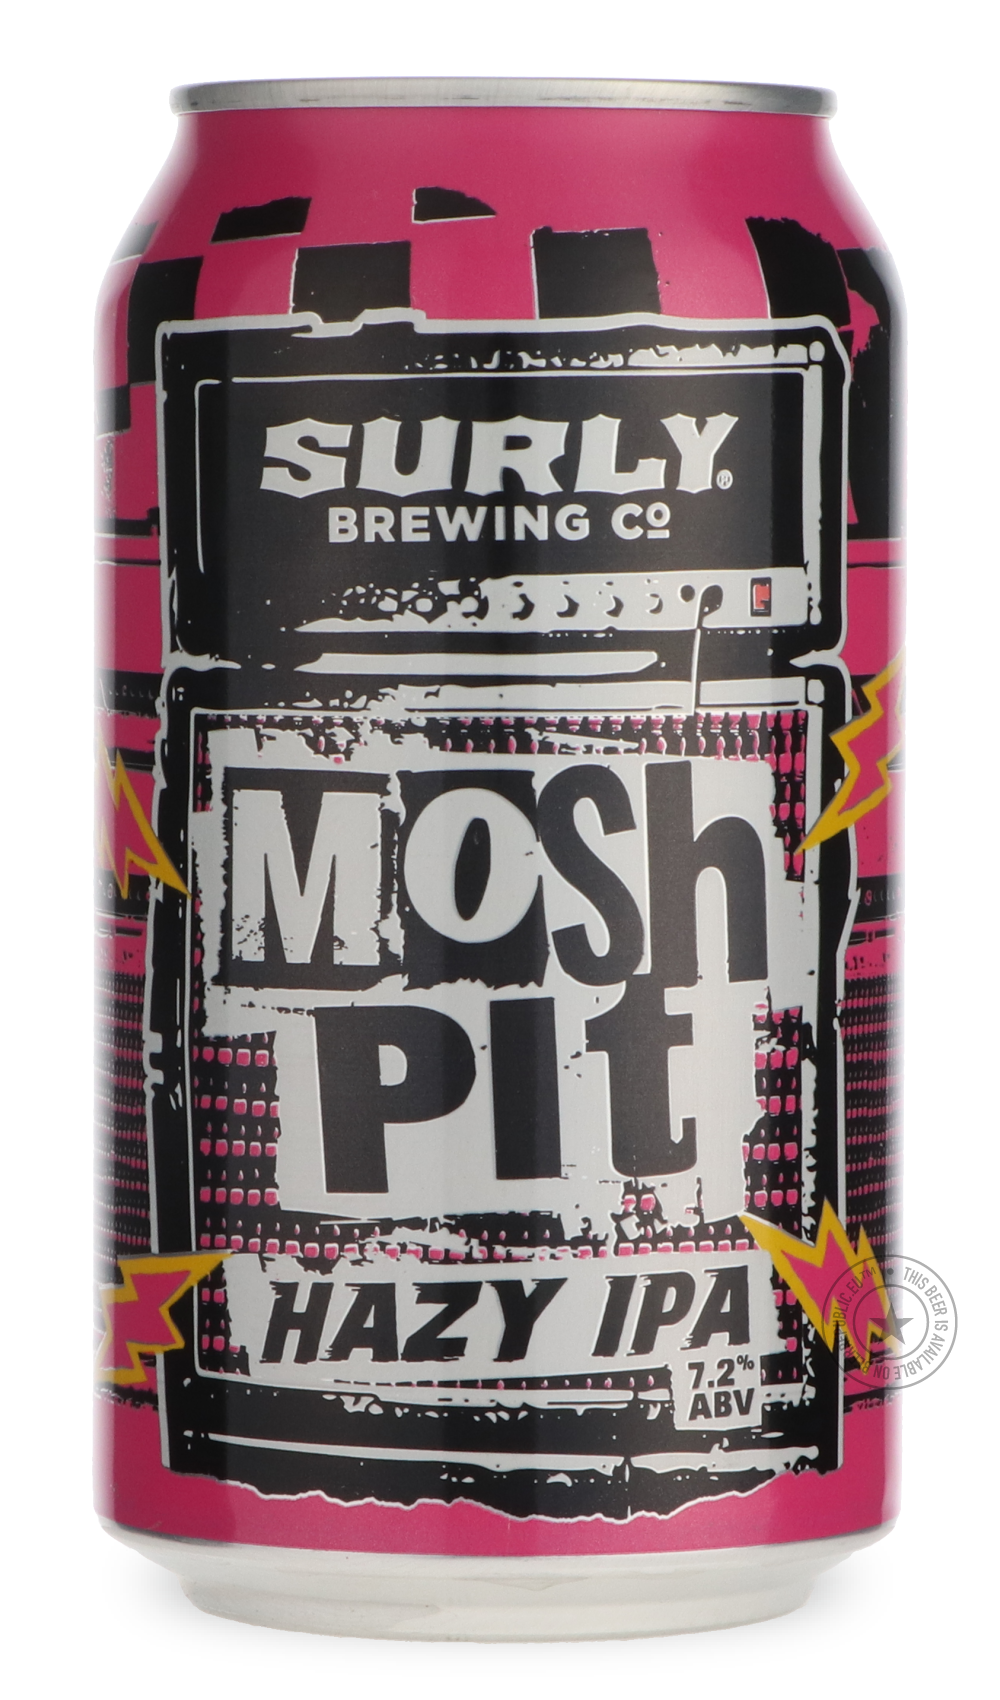 -Surly- Mosh Pit Hazy-IPA- Only @ Beer Republic - The best online beer store for American & Canadian craft beer - Buy beer online from the USA and Canada - Bier online kopen - Amerikaans bier kopen - Craft beer store - Craft beer kopen - Amerikanisch bier kaufen - Bier online kaufen - Acheter biere online - IPA - Stout - Porter - New England IPA - Hazy IPA - Imperial Stout - Barrel Aged - Barrel Aged Imperial Stout - Brown - Dark beer - Blond - Blonde - Pilsner - Lager - Wheat - Weizen - Amber - Barley Wine